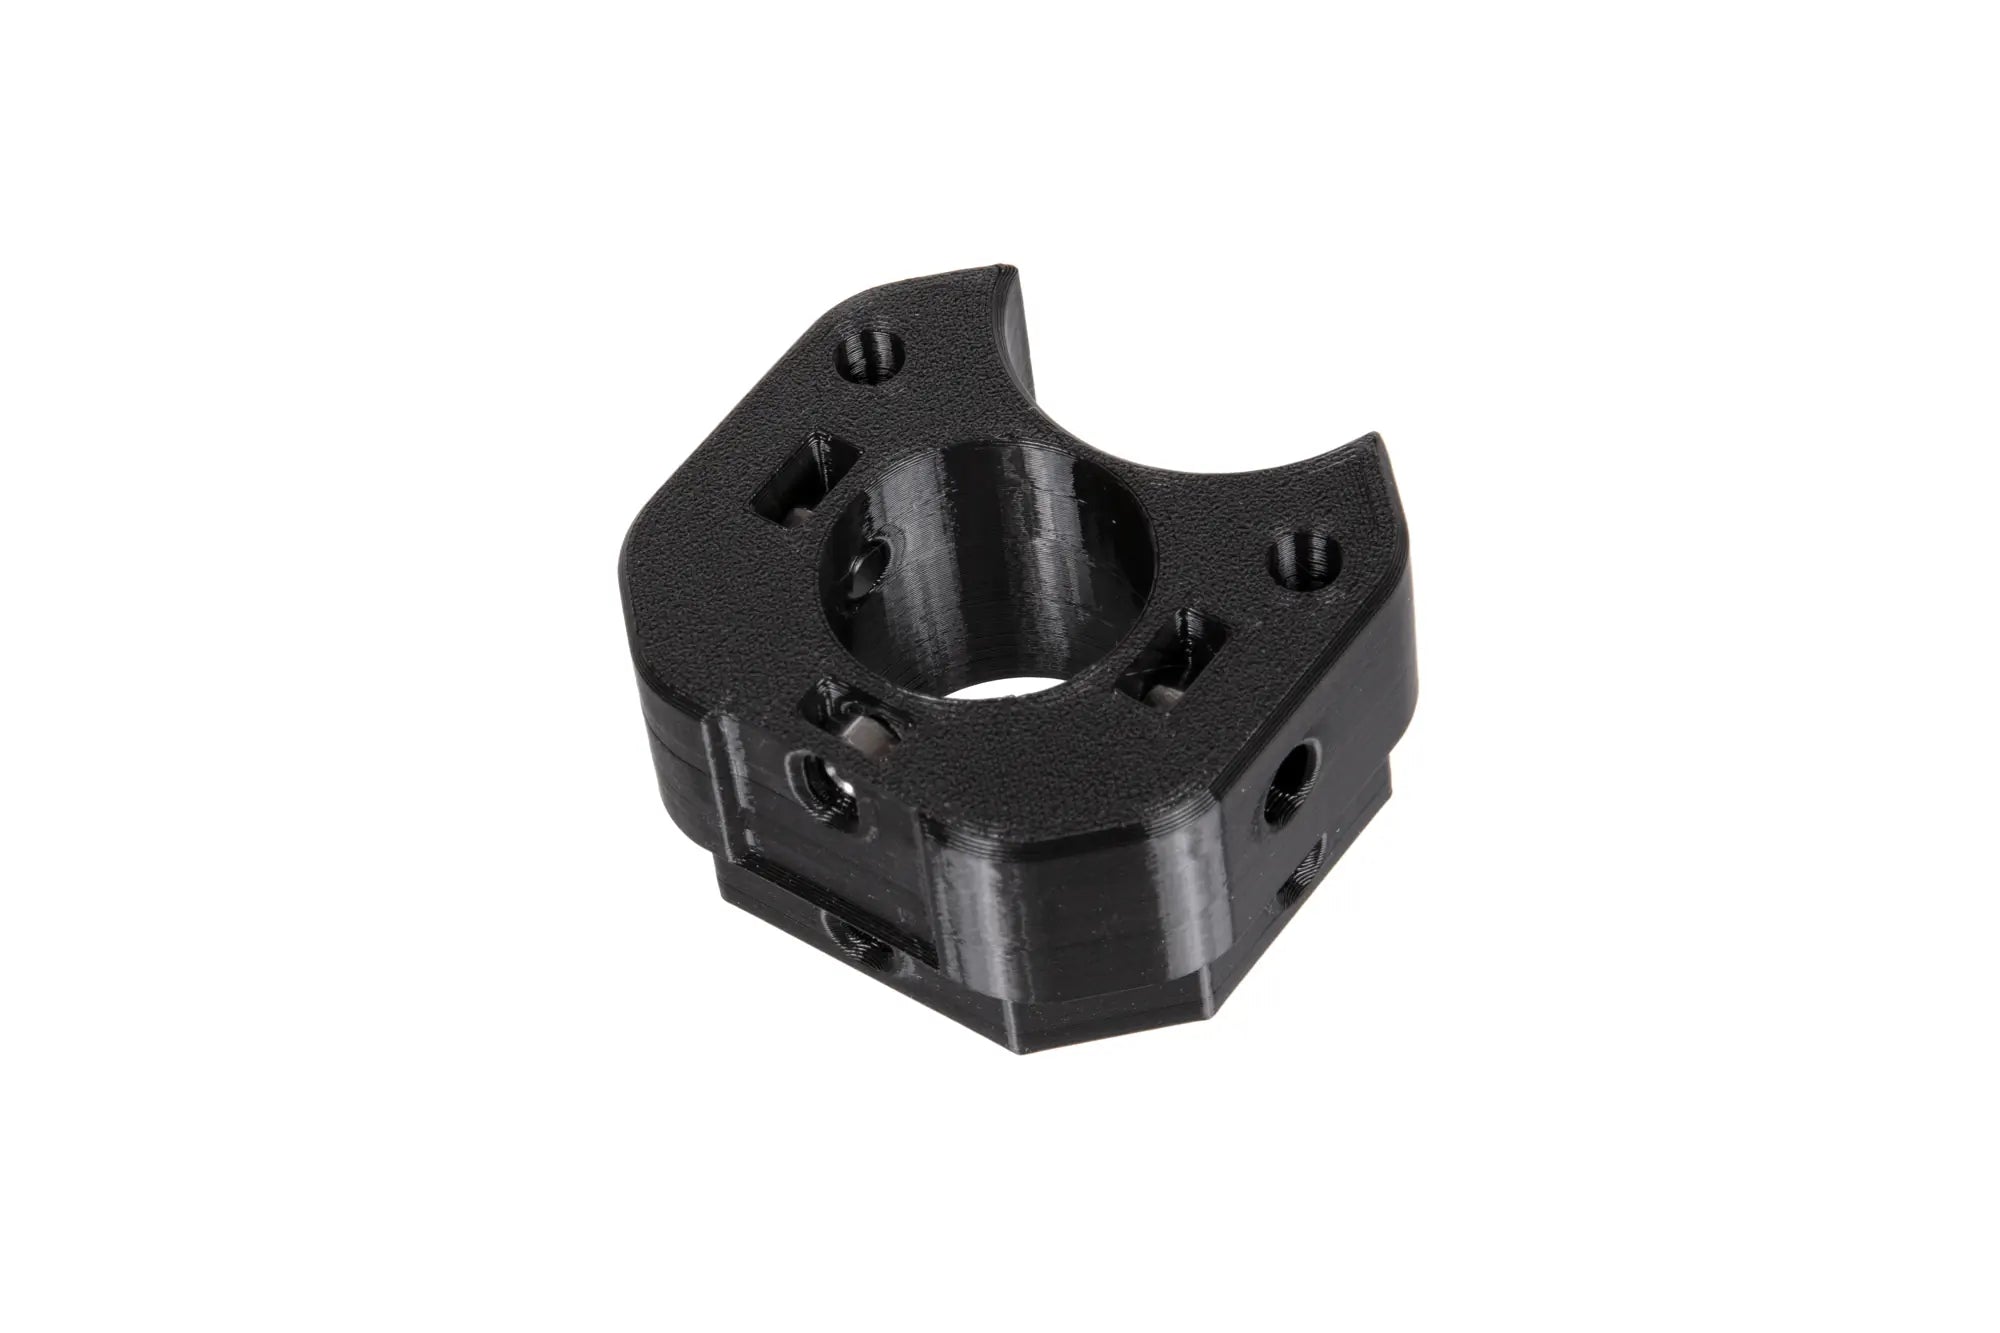 Shotgun Tracer Adapter for LayLax Replicas PCU 3D